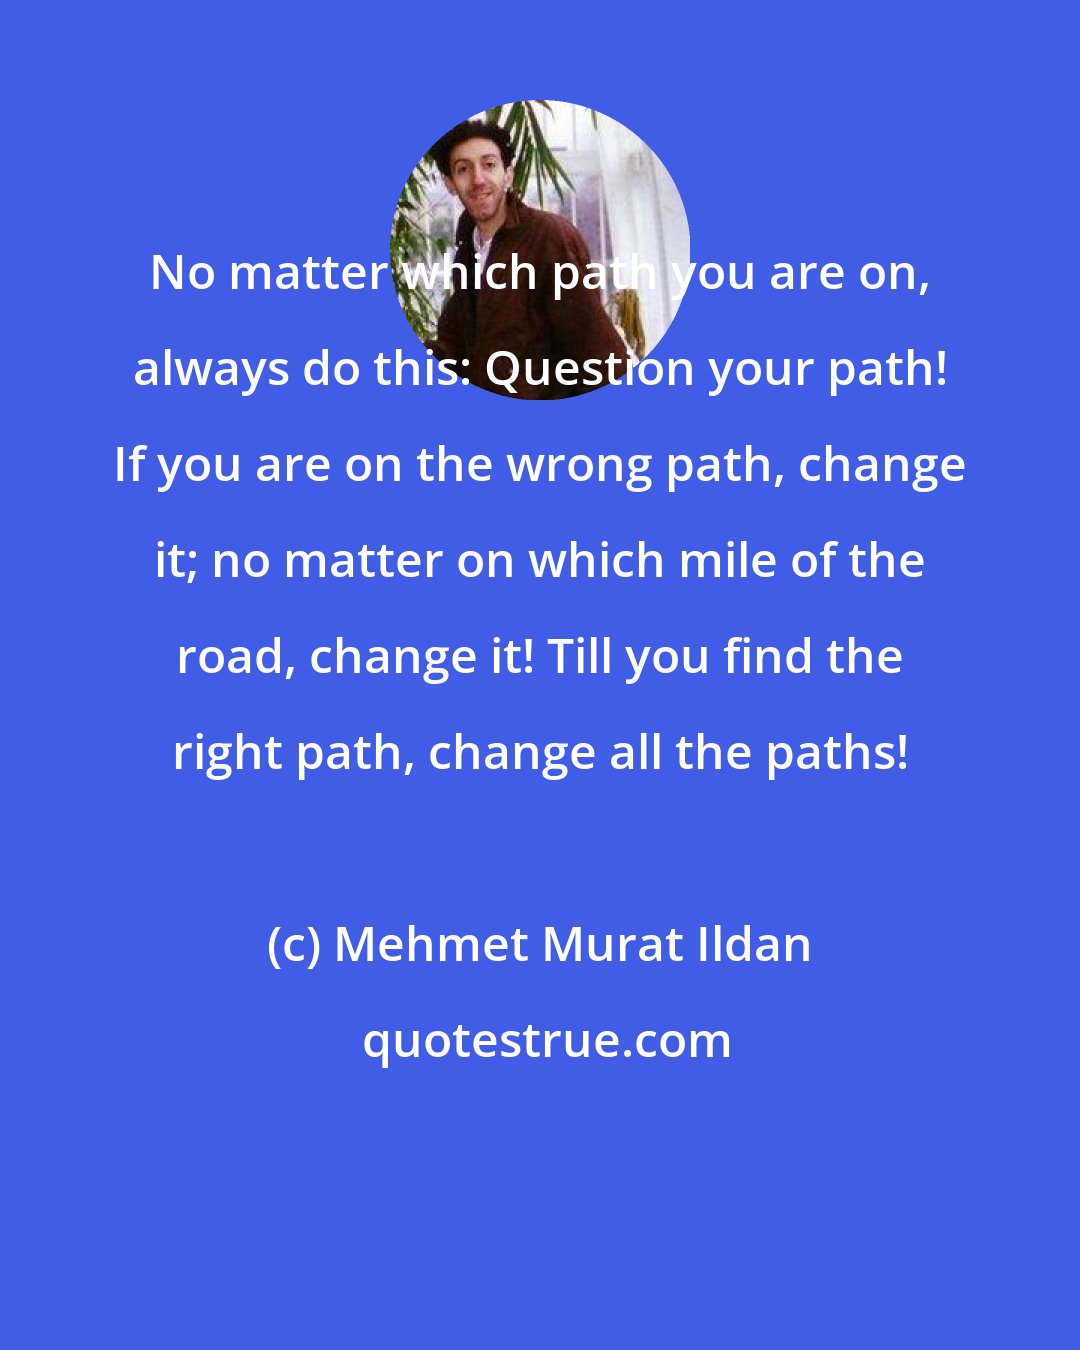 Mehmet Murat Ildan: No matter which path you are on, always do this: Question your path! If you are on the wrong path, change it; no matter on which mile of the road, change it! Till you find the right path, change all the paths!